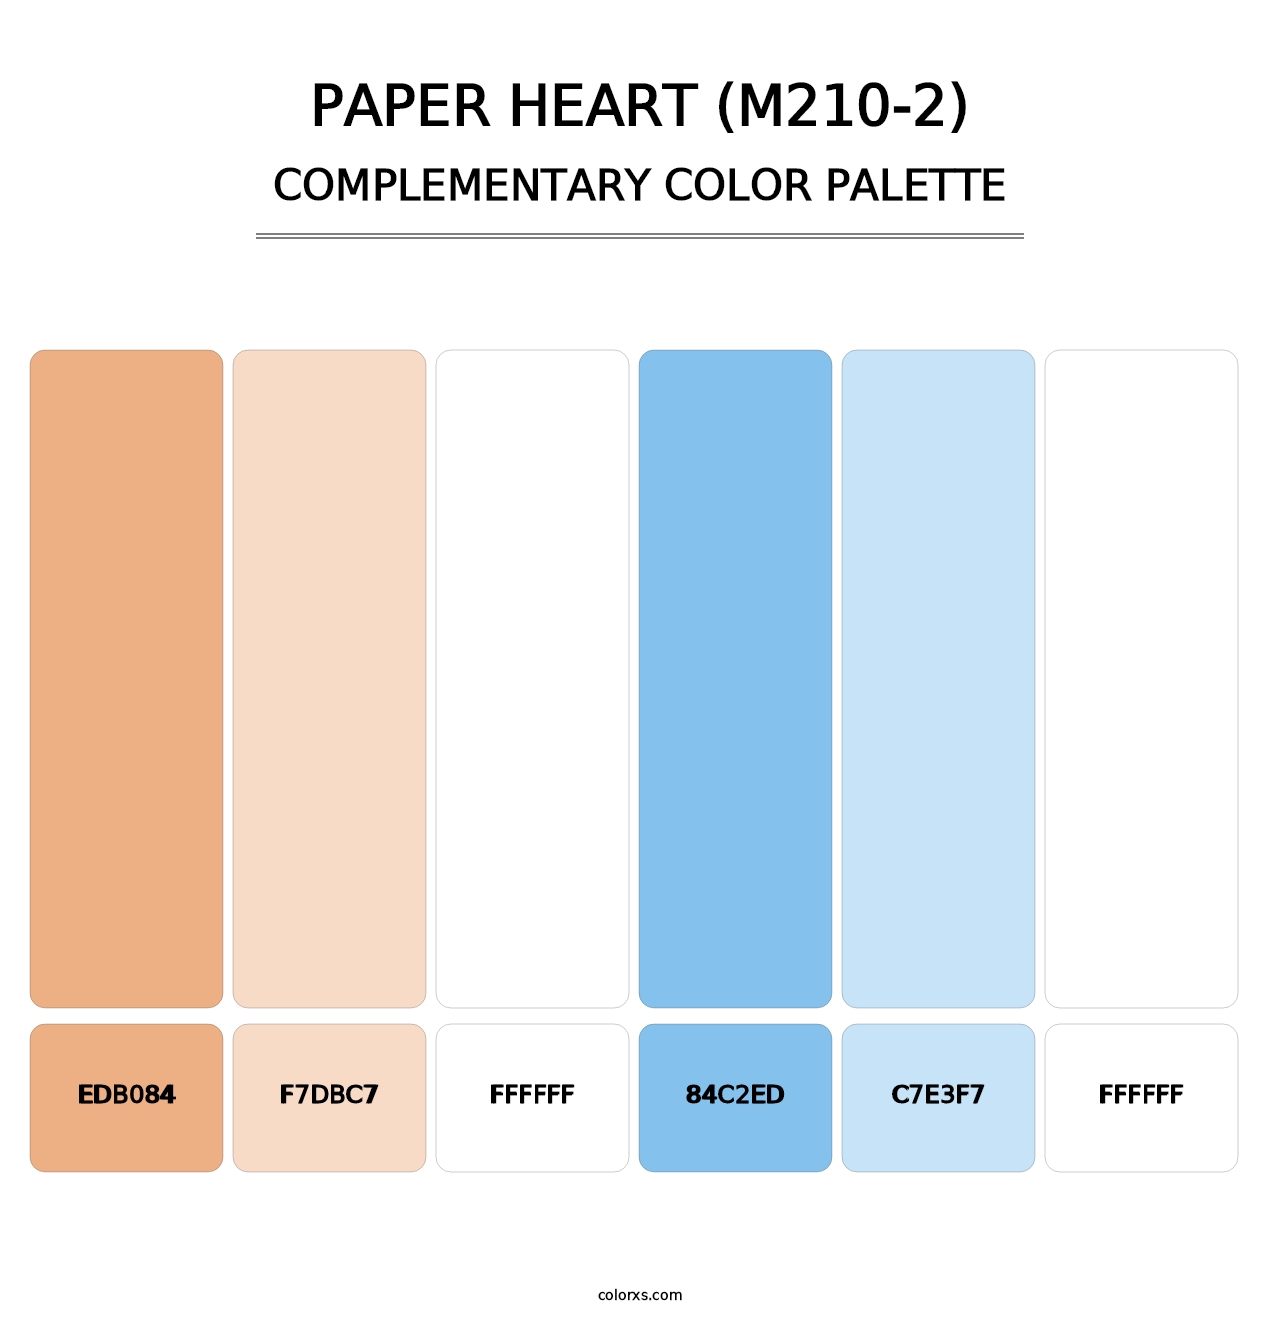 Paper Heart (M210-2) - Complementary Color Palette